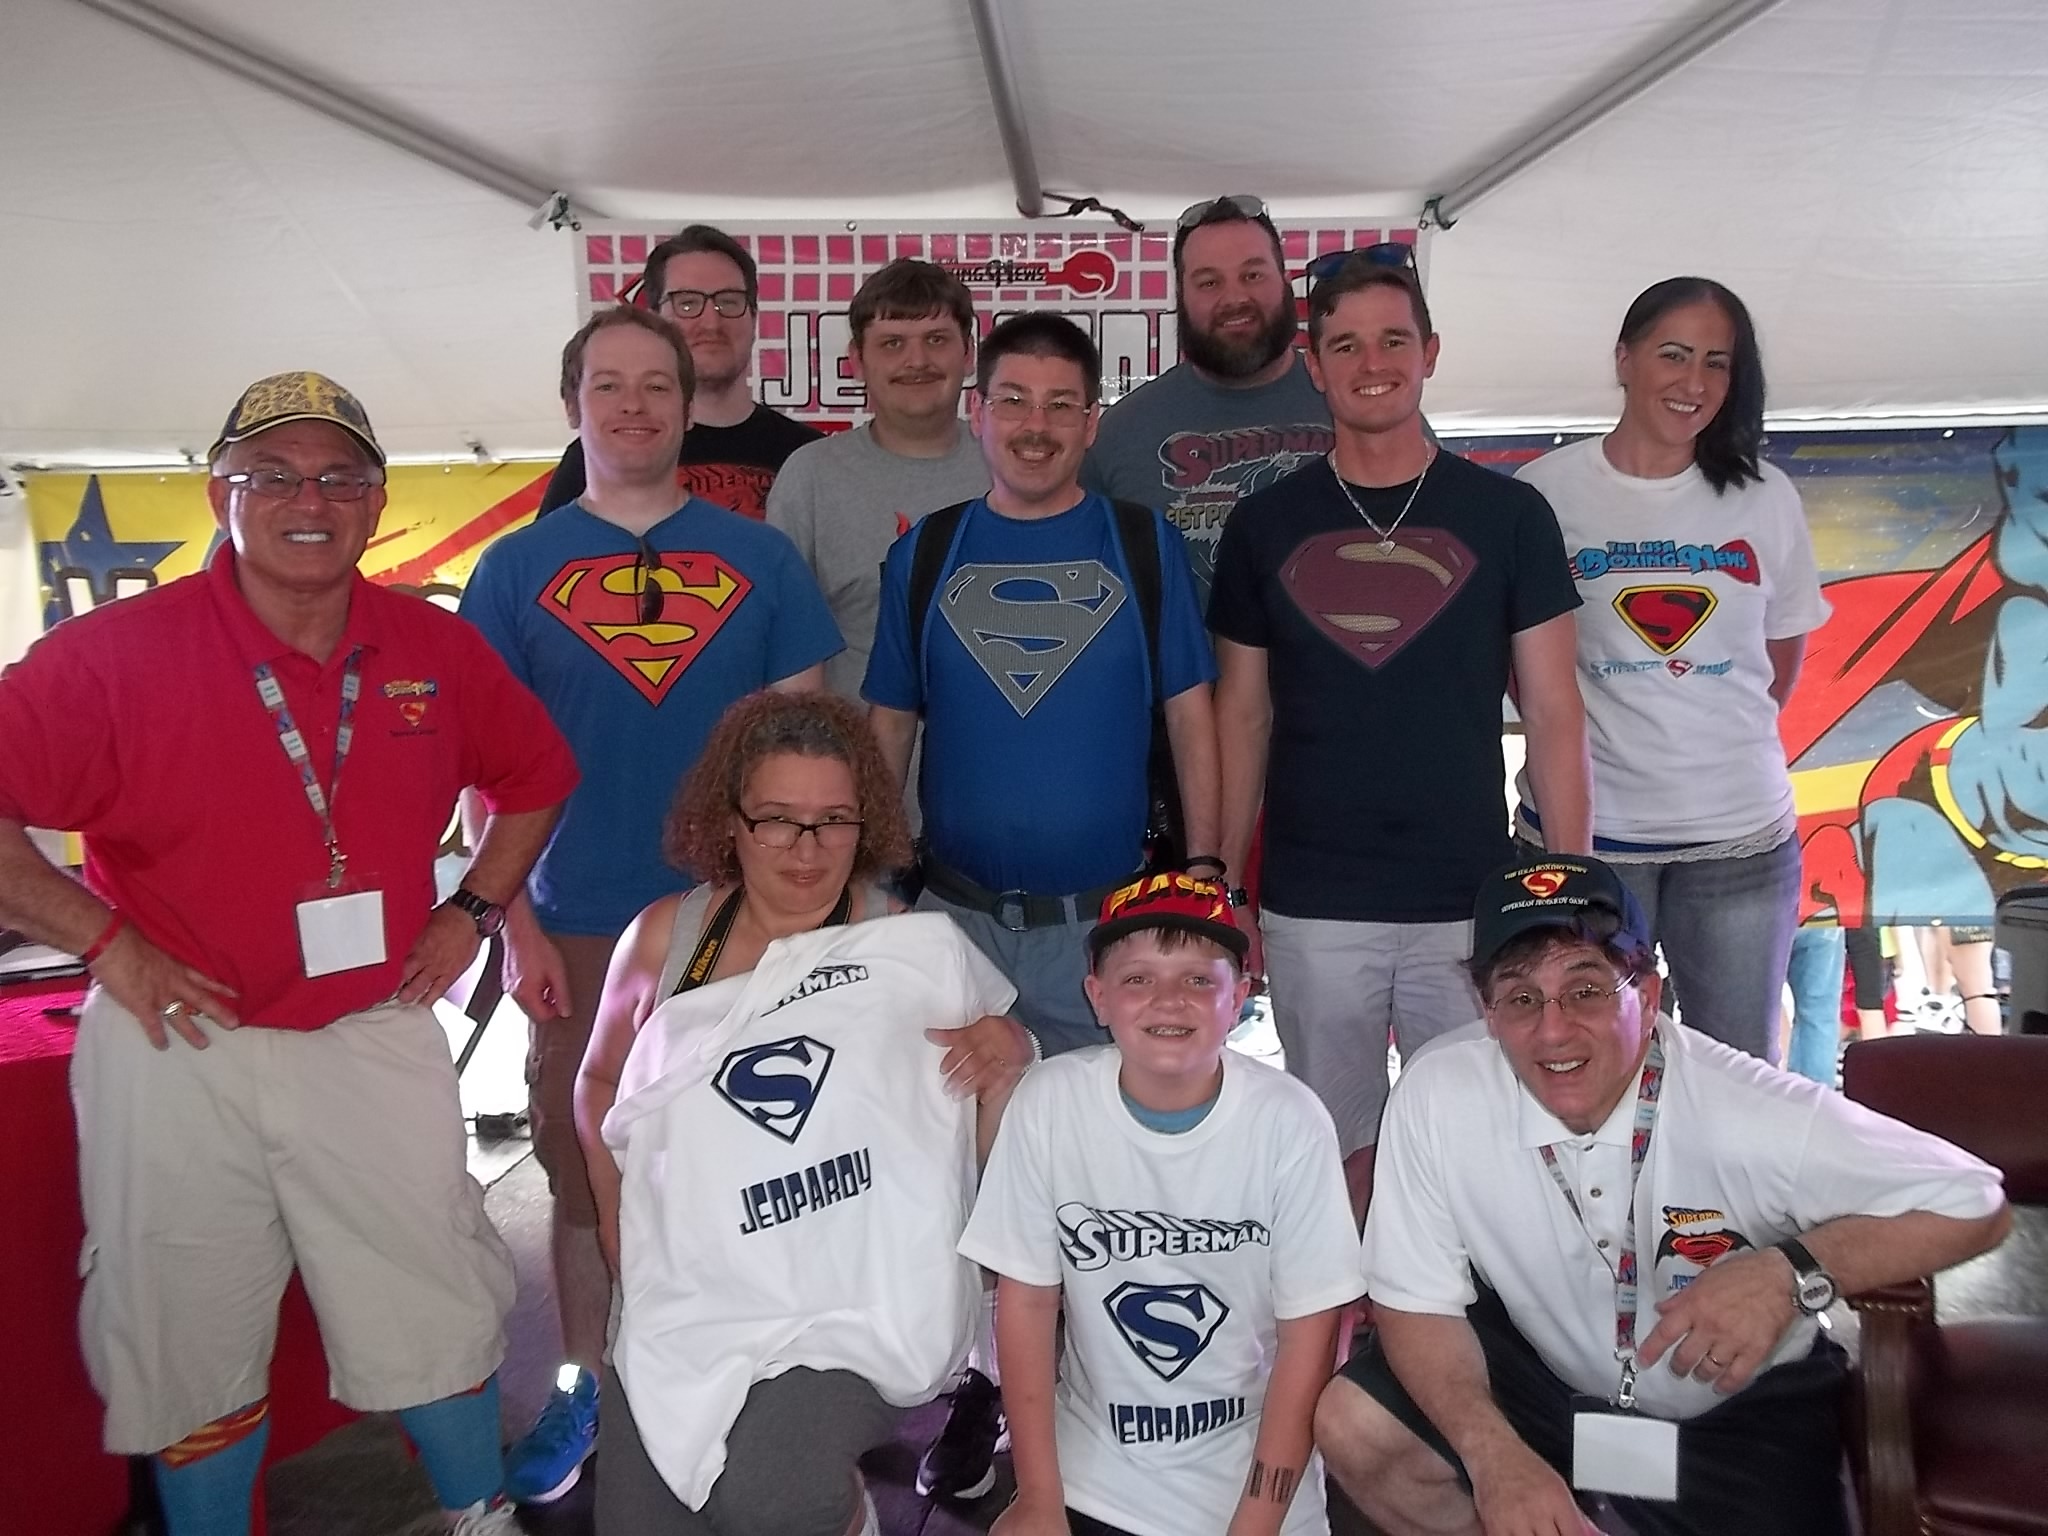 The group photo of 2016 The USA Boxing News Superman jeopardy Game